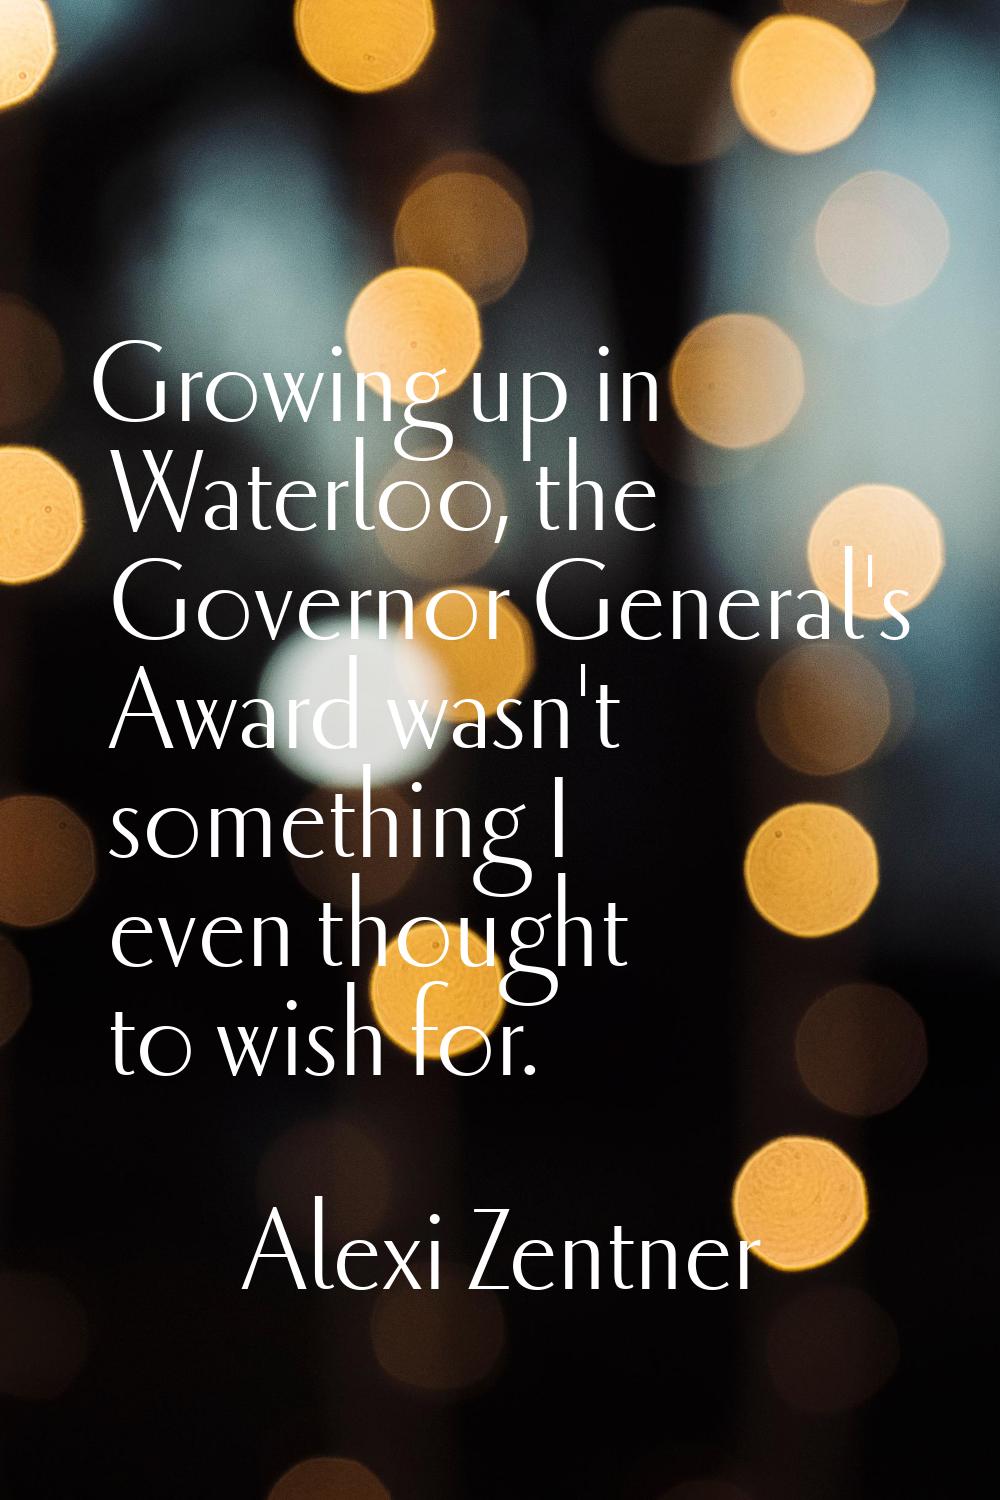 Growing up in Waterloo, the Governor General's Award wasn't something I even thought to wish for.